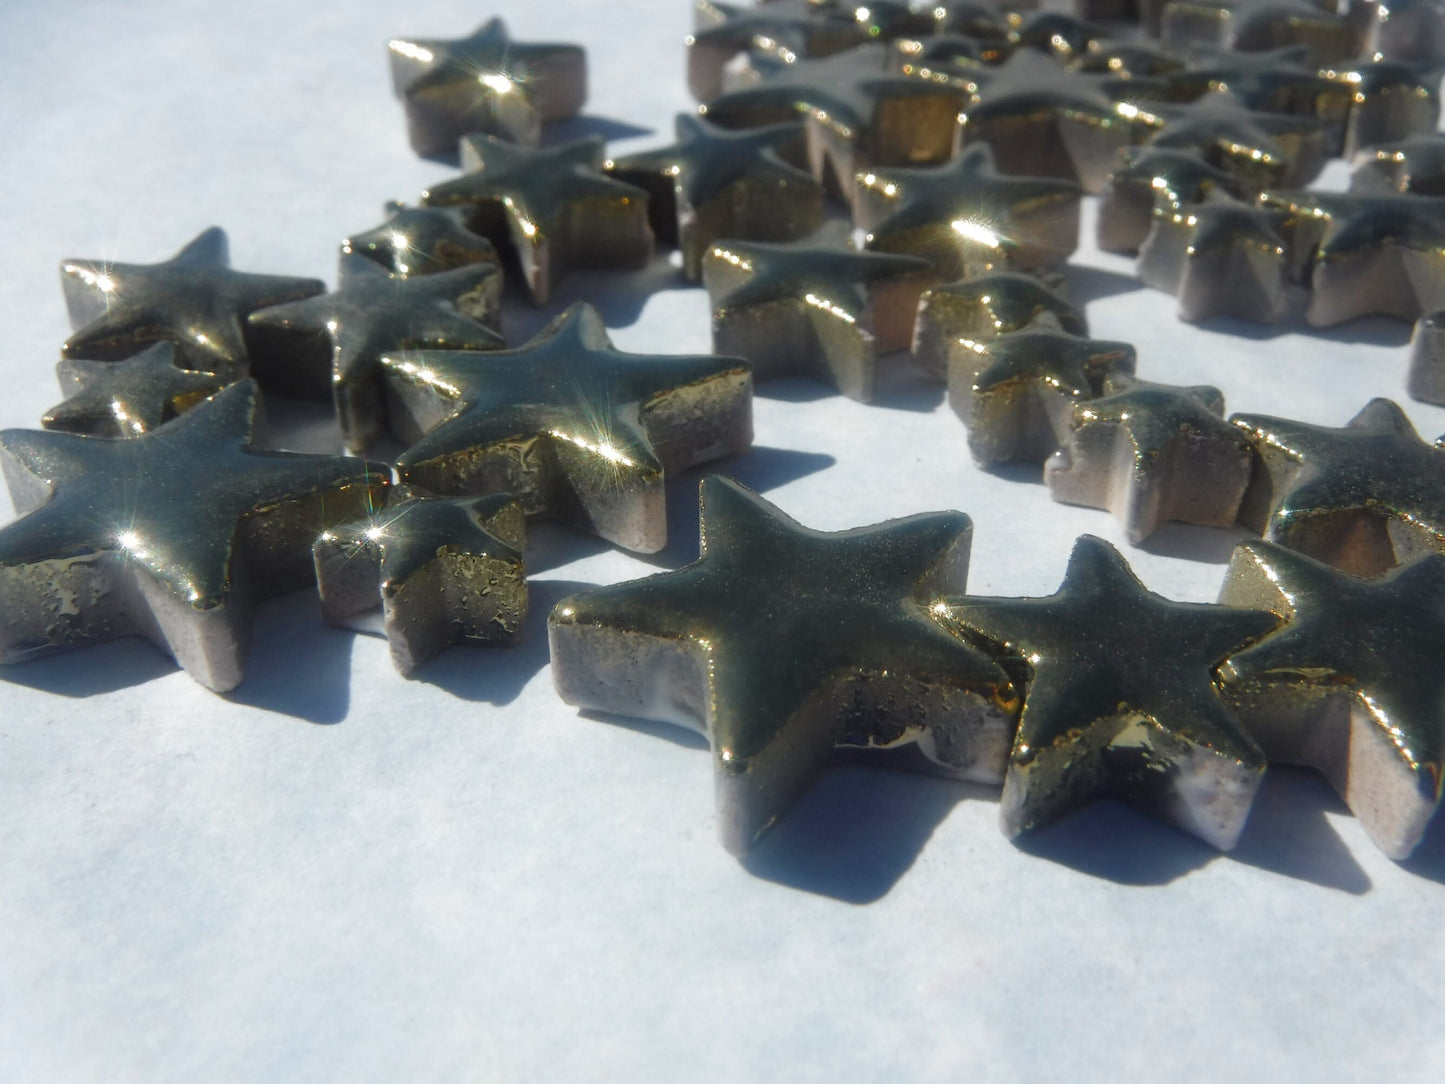 Gold Stars Mosaic Tiles - 50g Ceramic in Mix of 3 Sizes - 20mm, 15mm, 10mm